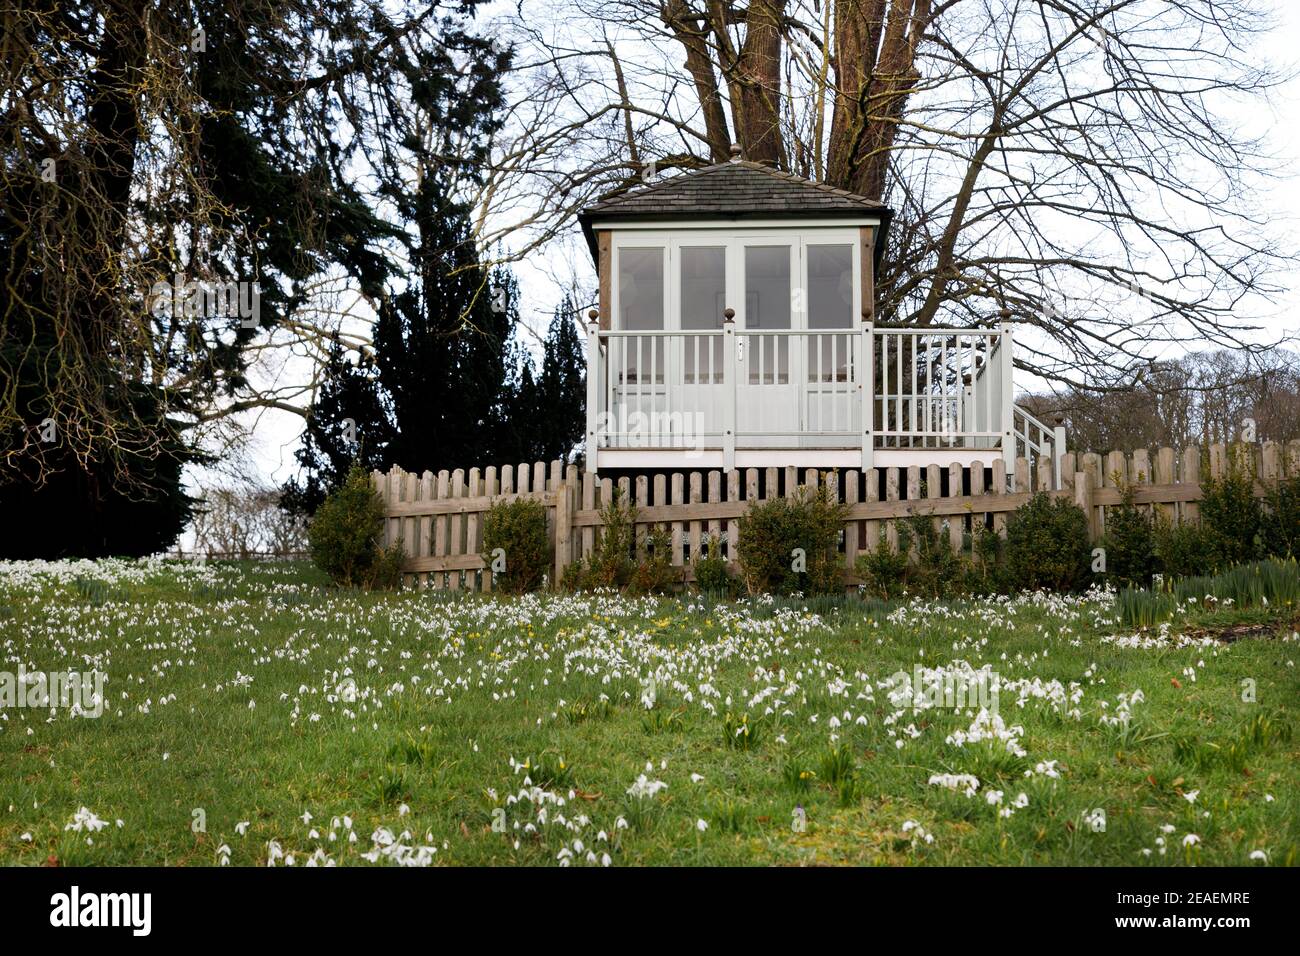 Summer house overlooking bank of snowdrops at Easton Walled Garden, Lincolnshire, February Stock Photo